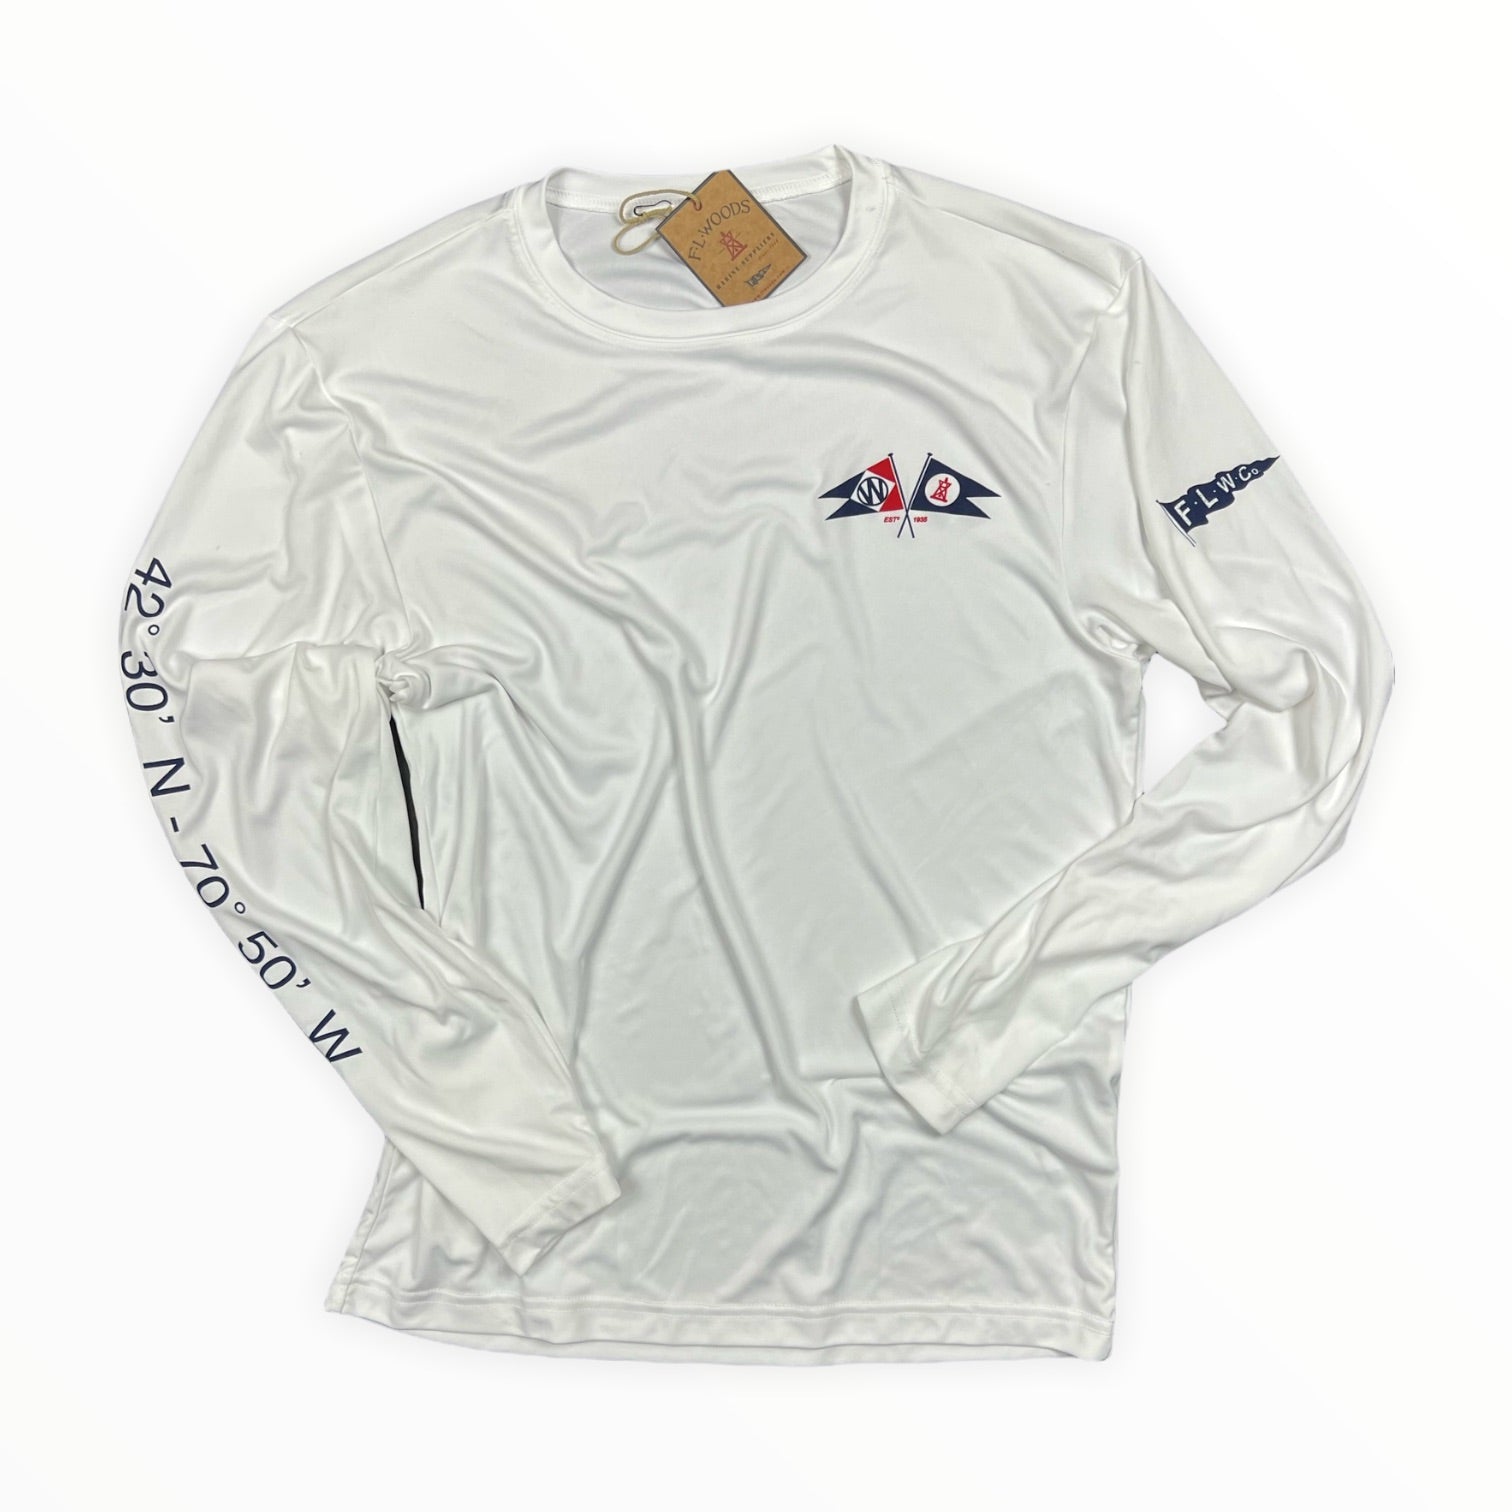 Youth PERFORMANCE TEE White